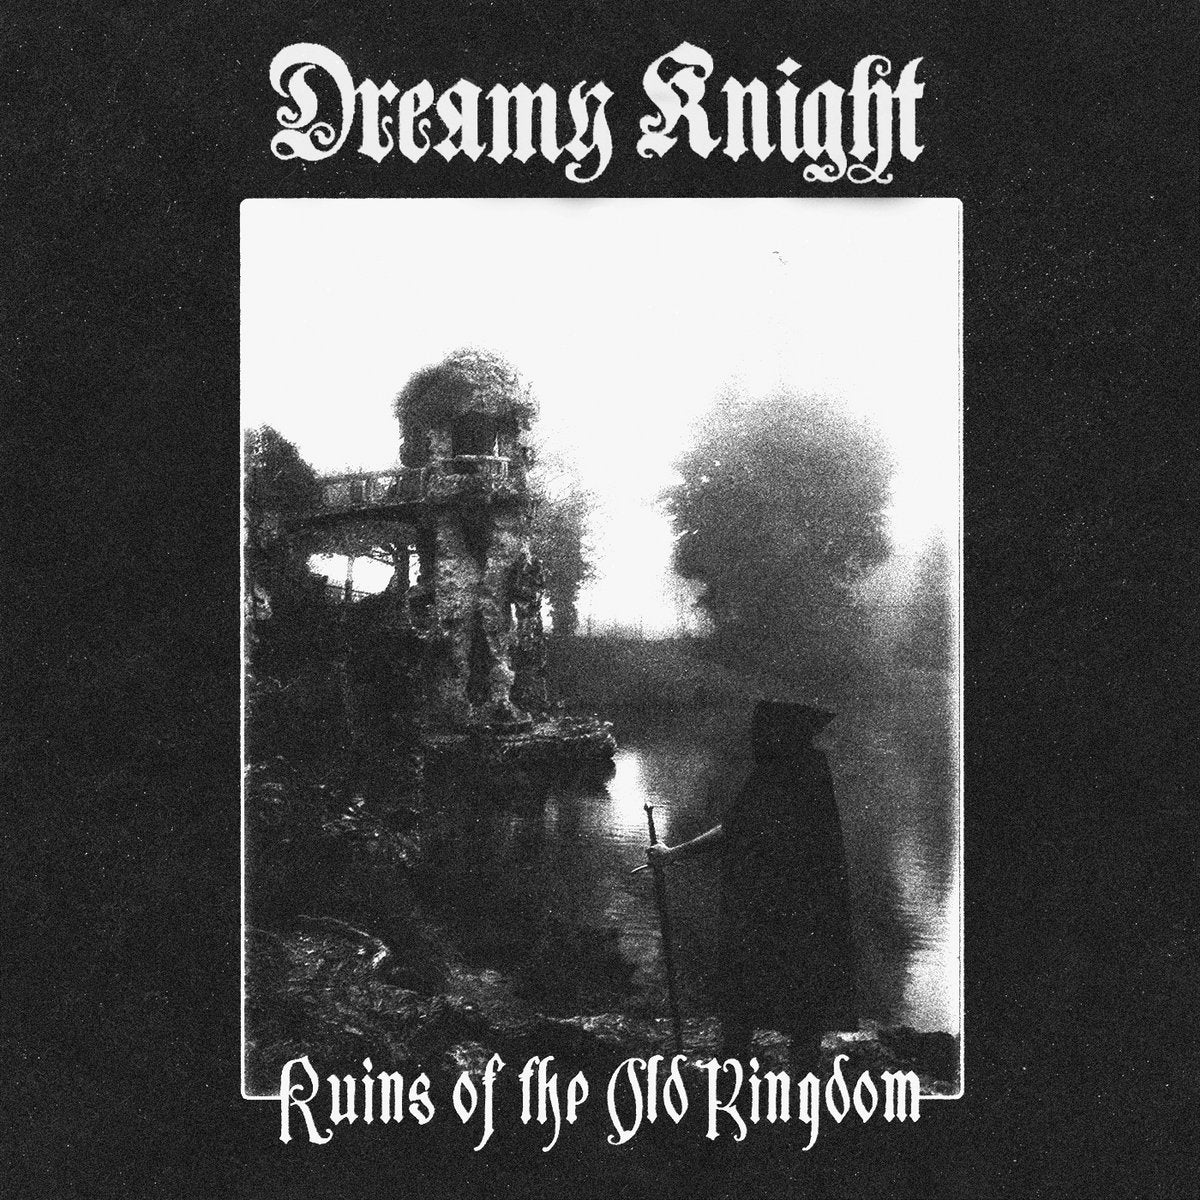 [SOLD OUT] DREAMY KNIGHT "Ruins of the Old Kingdom" cassette tape